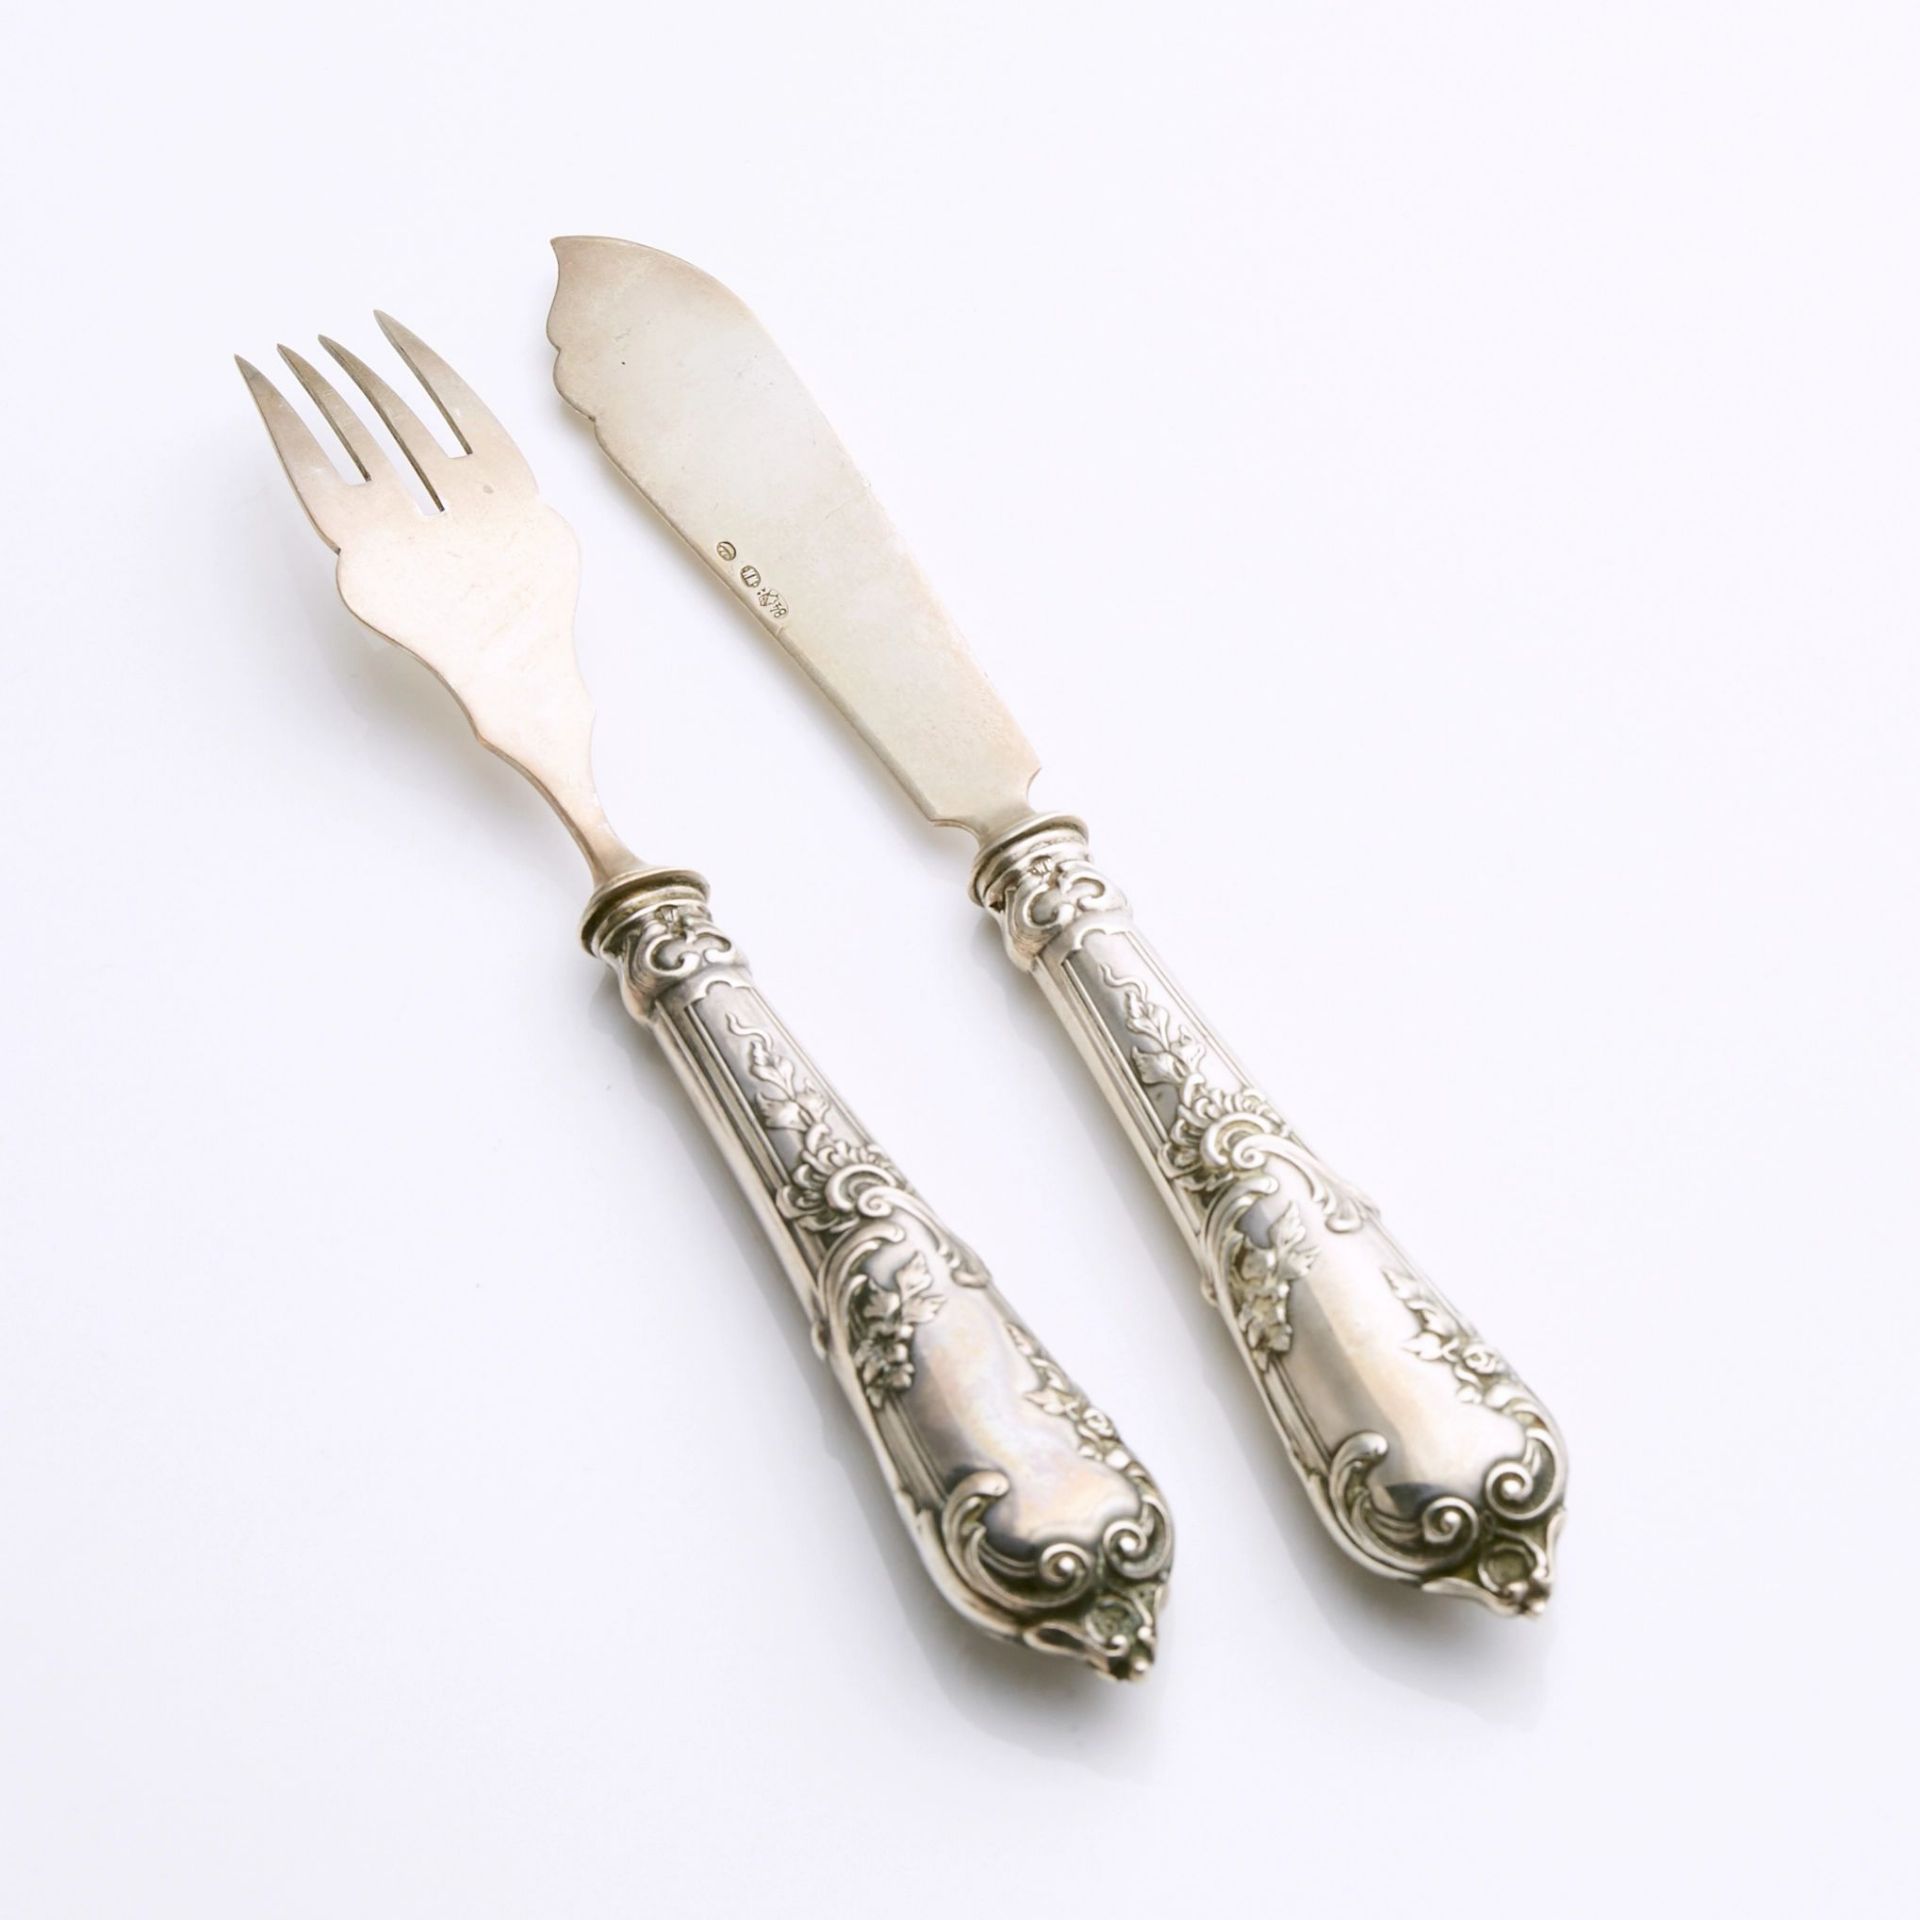 Silver set for fish table. Royal Russia. - Image 5 of 6